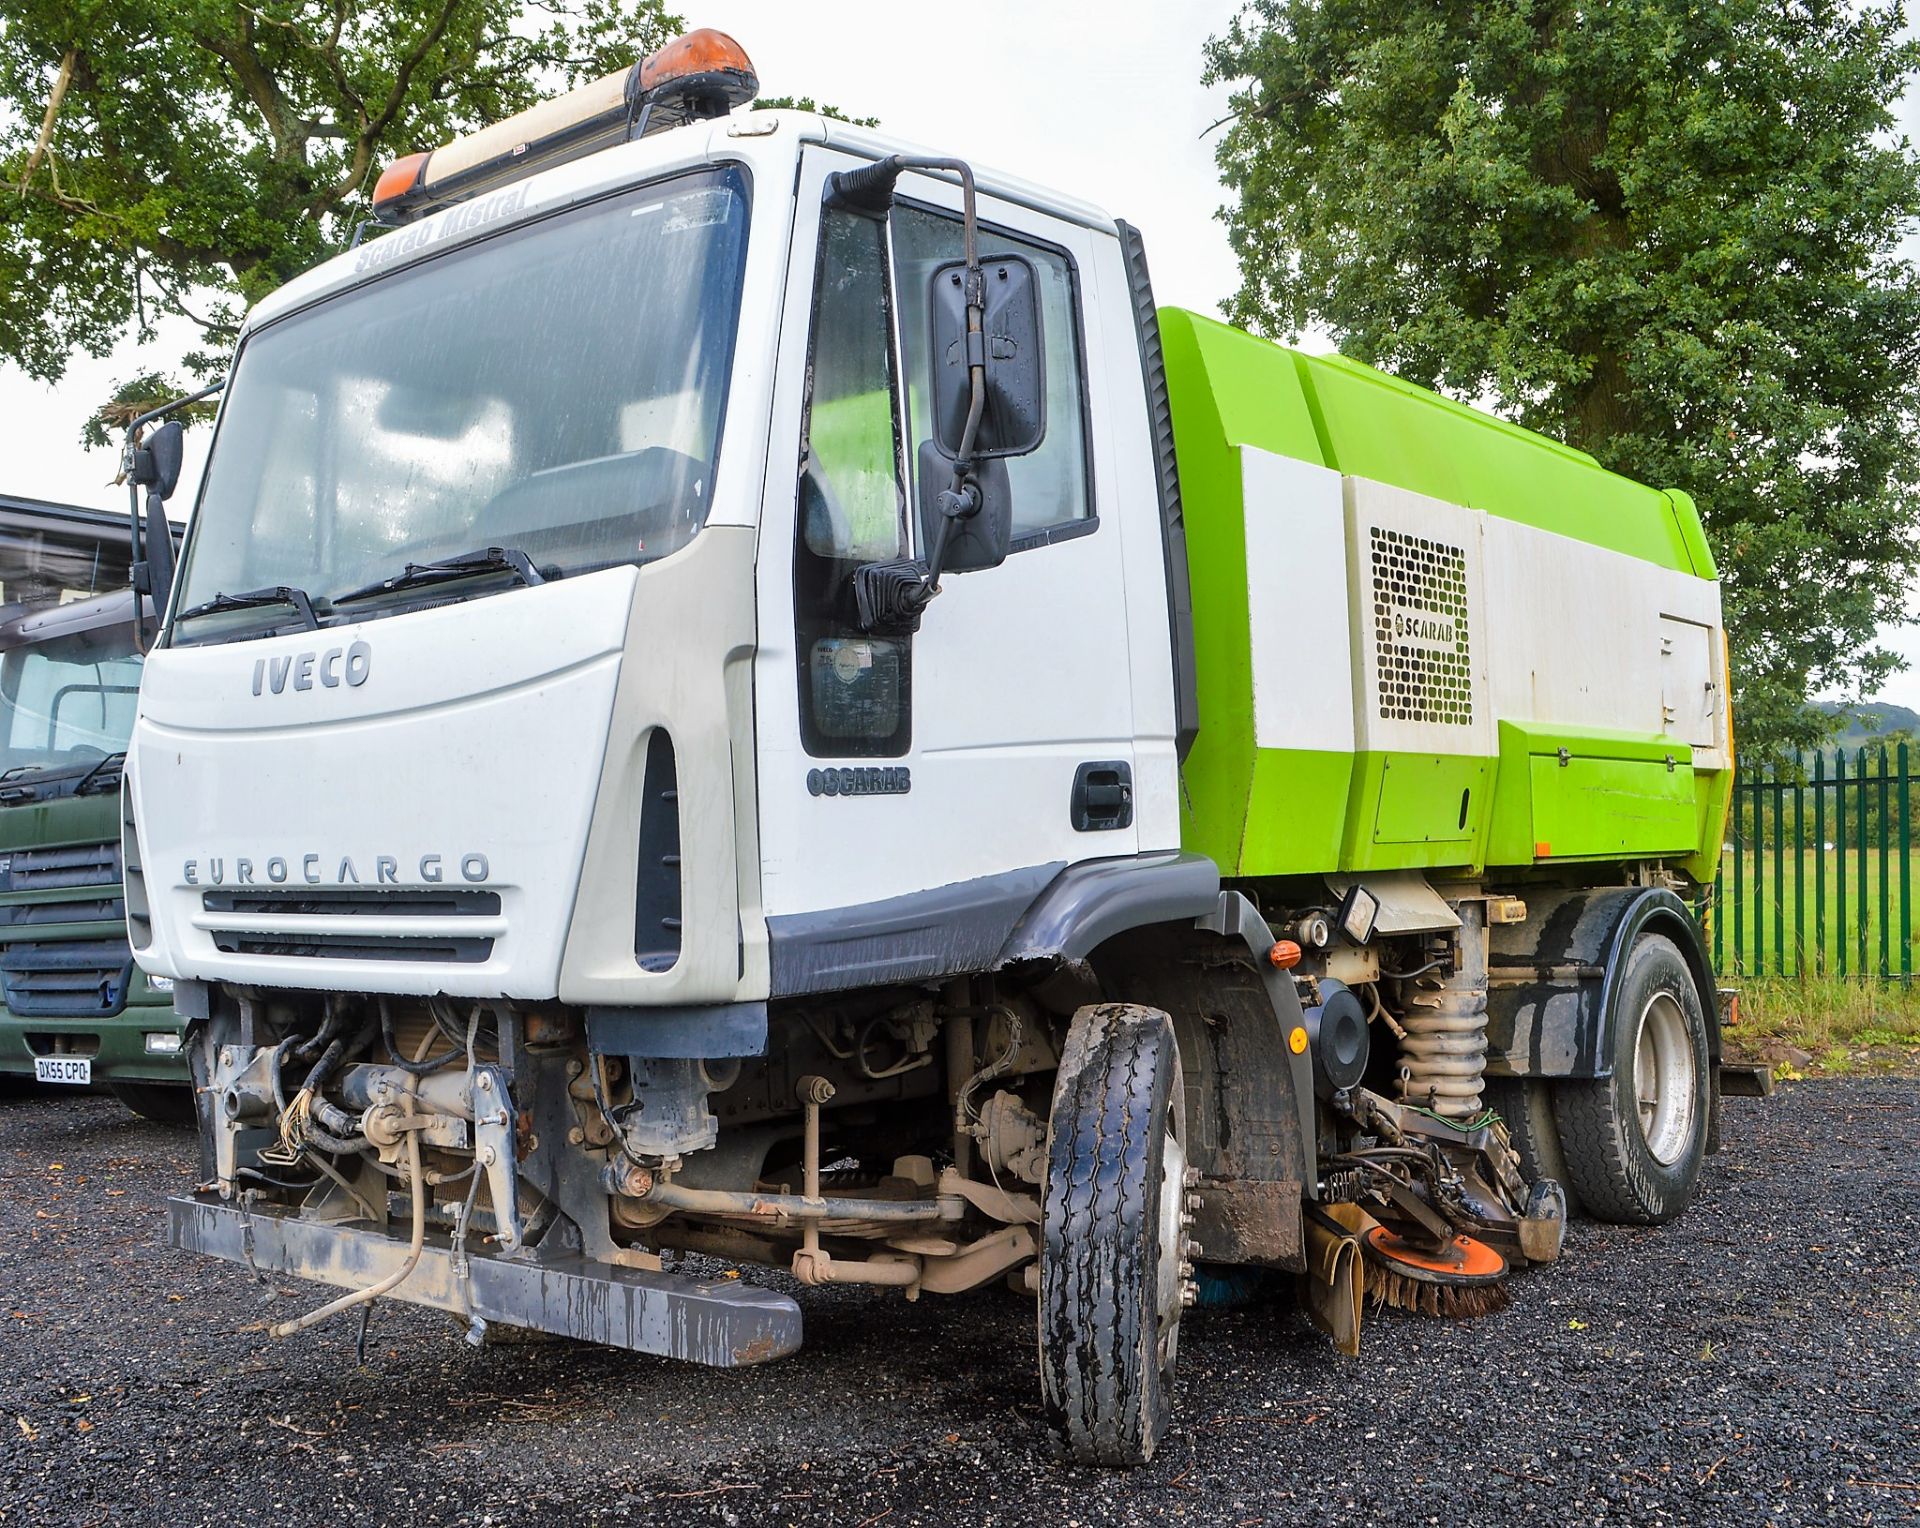 Iveco Eurocargo 14 tonne Scarab street cleansing lorry Registration Number: RX56 ORZ Date of